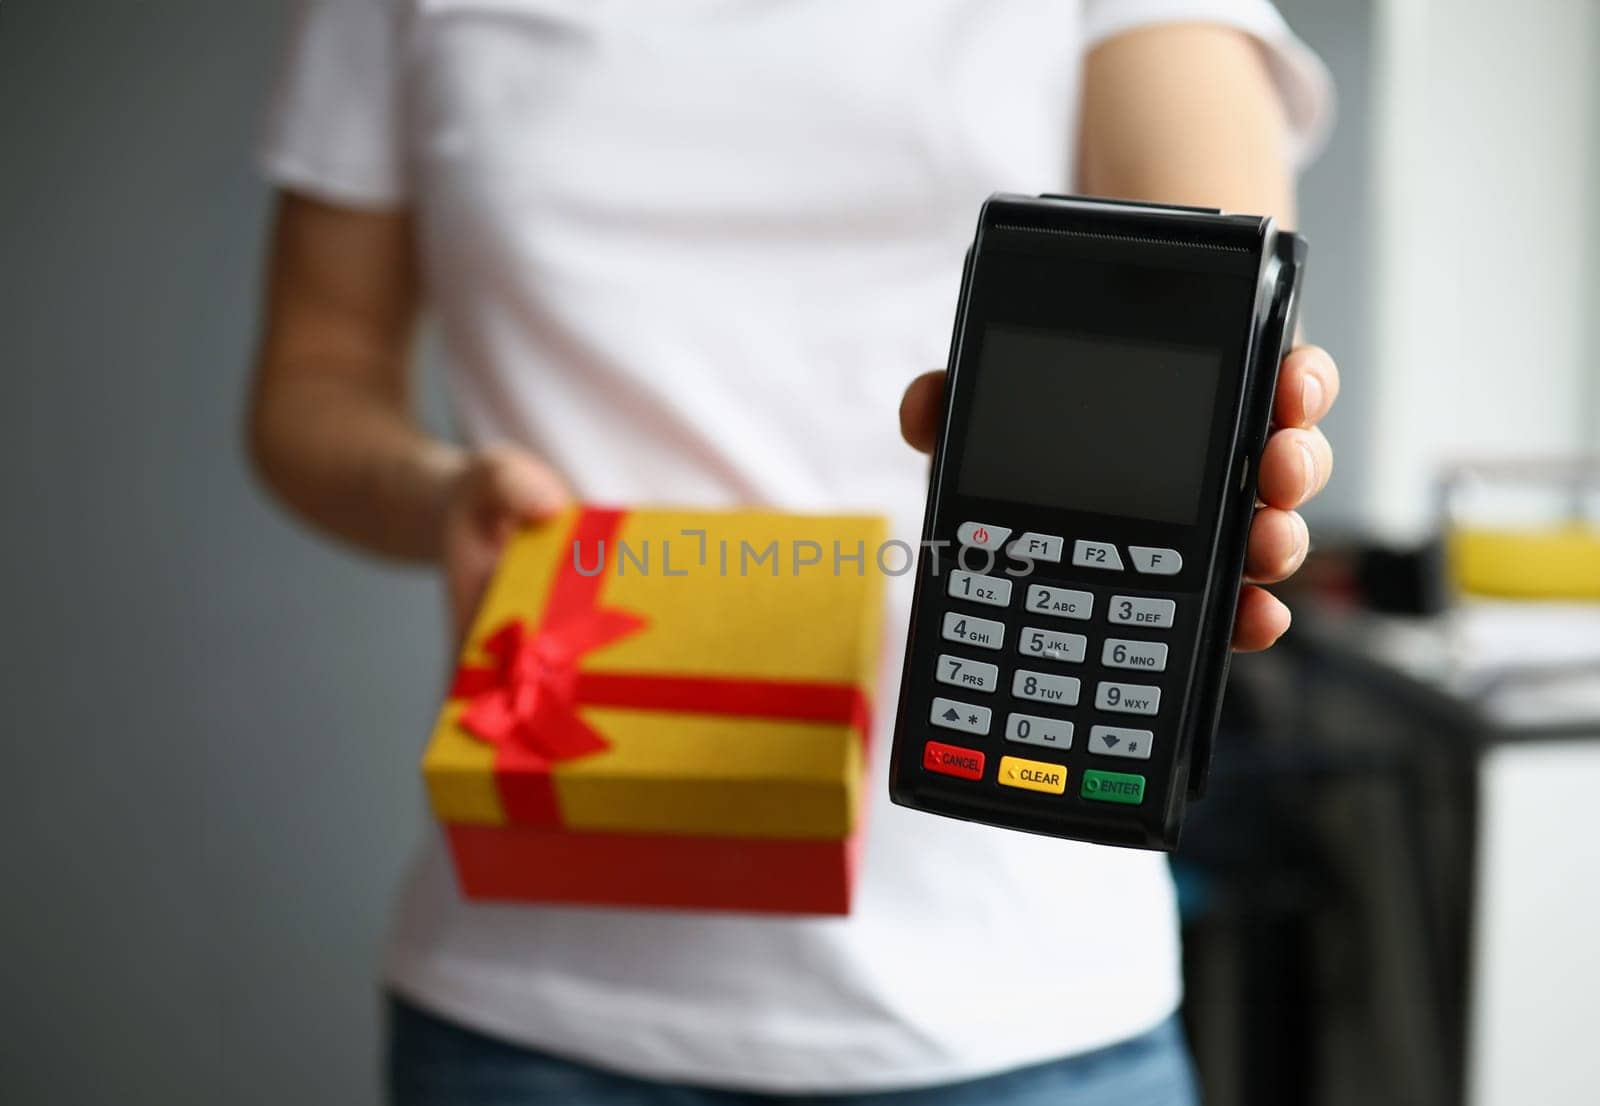 Courier is holding gift box and payment terminal by kuprevich